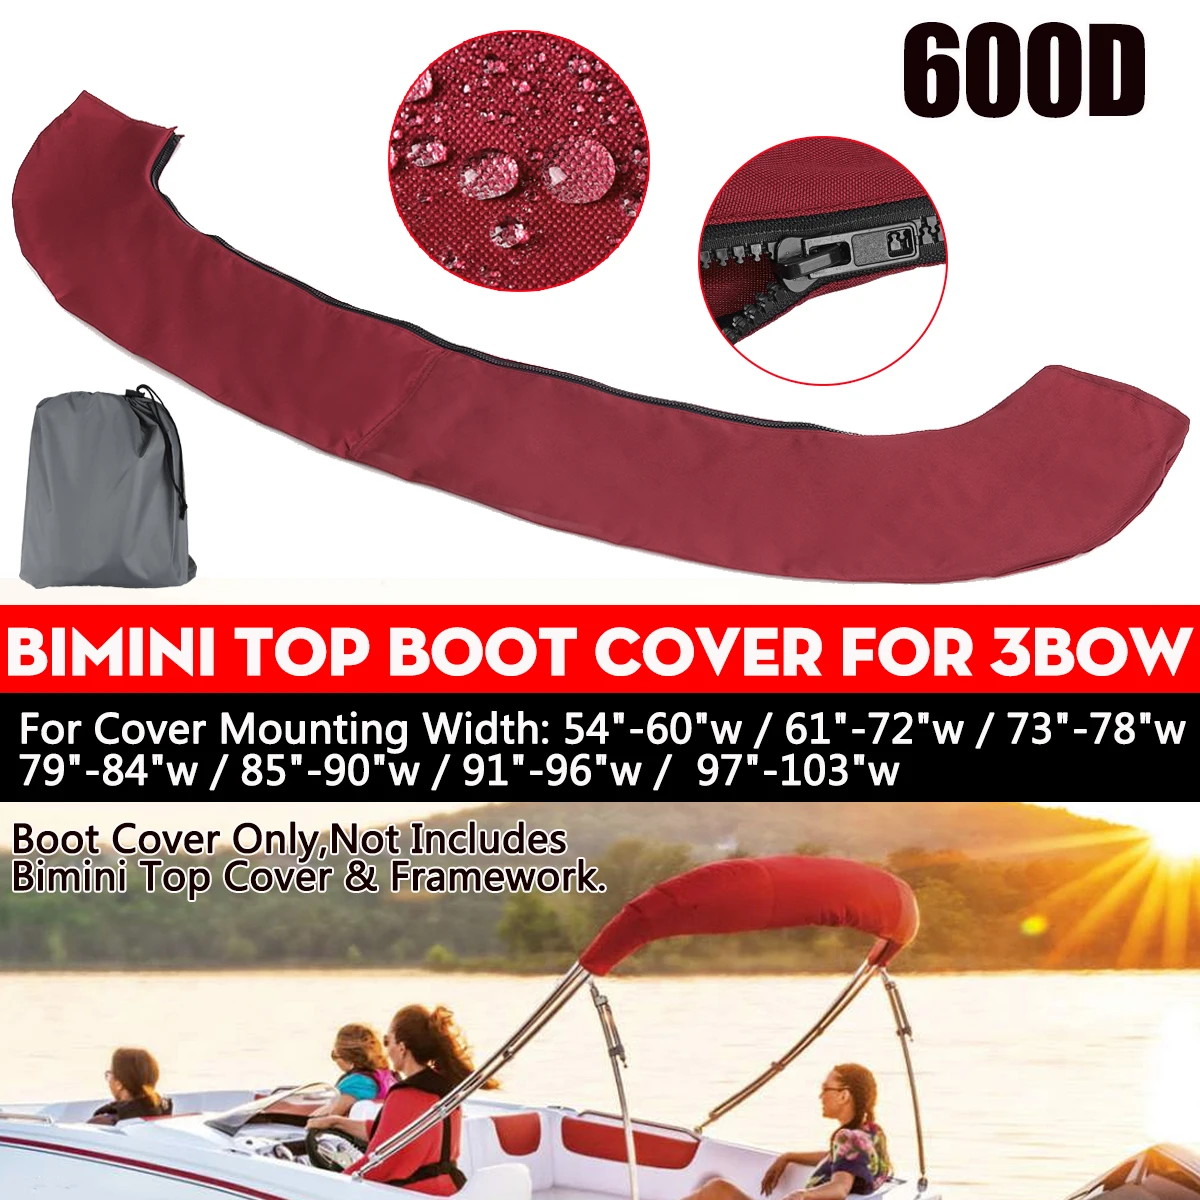 600D 3 Bow Bimini Top Boot Cover No Frame Waterproof Yacht Boat Cover with Zipper Anti UV Dustproof Cover Marine Accessories customized yacht seat marine boat accessories pu cover marine fabric boat seat leather upholstery made in china boat seat